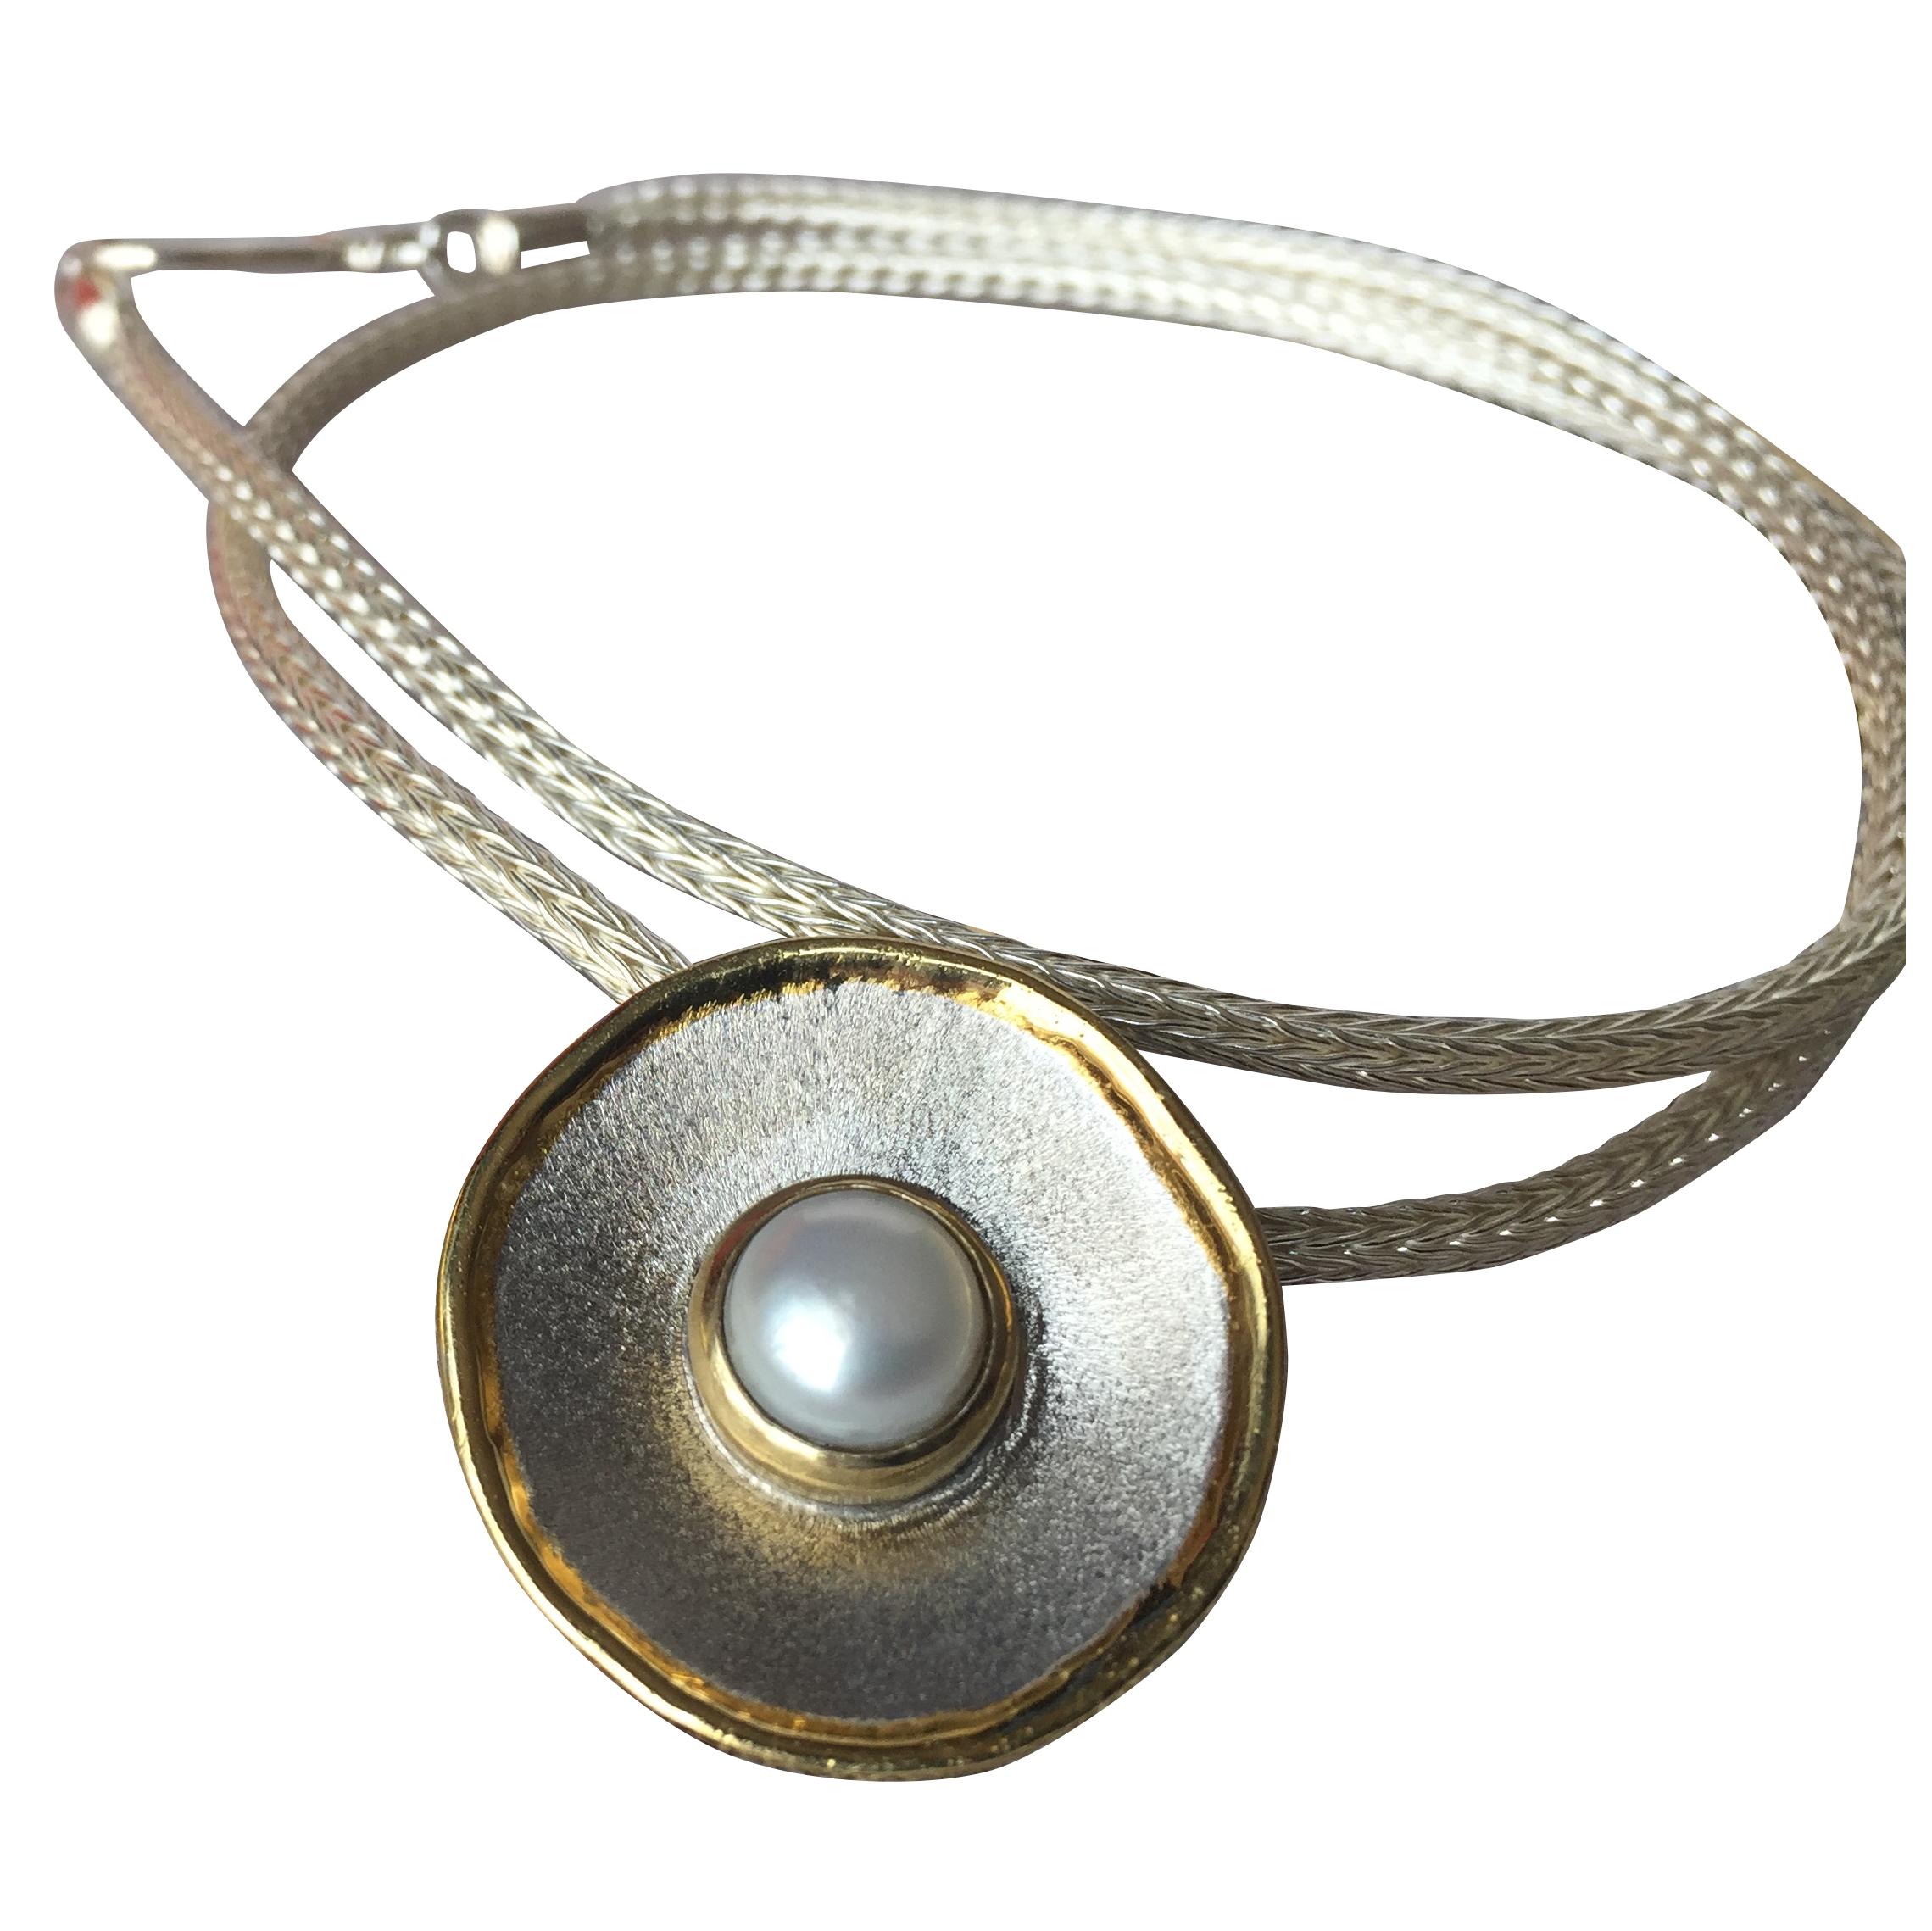 Yianni Creations Midas Collection is a handmade artisan slide from fine silver 950 purity and plated with palladium to resist against elements. This stunning pendant enhancer features 8mm round freshwater pearl on the brushed background and the